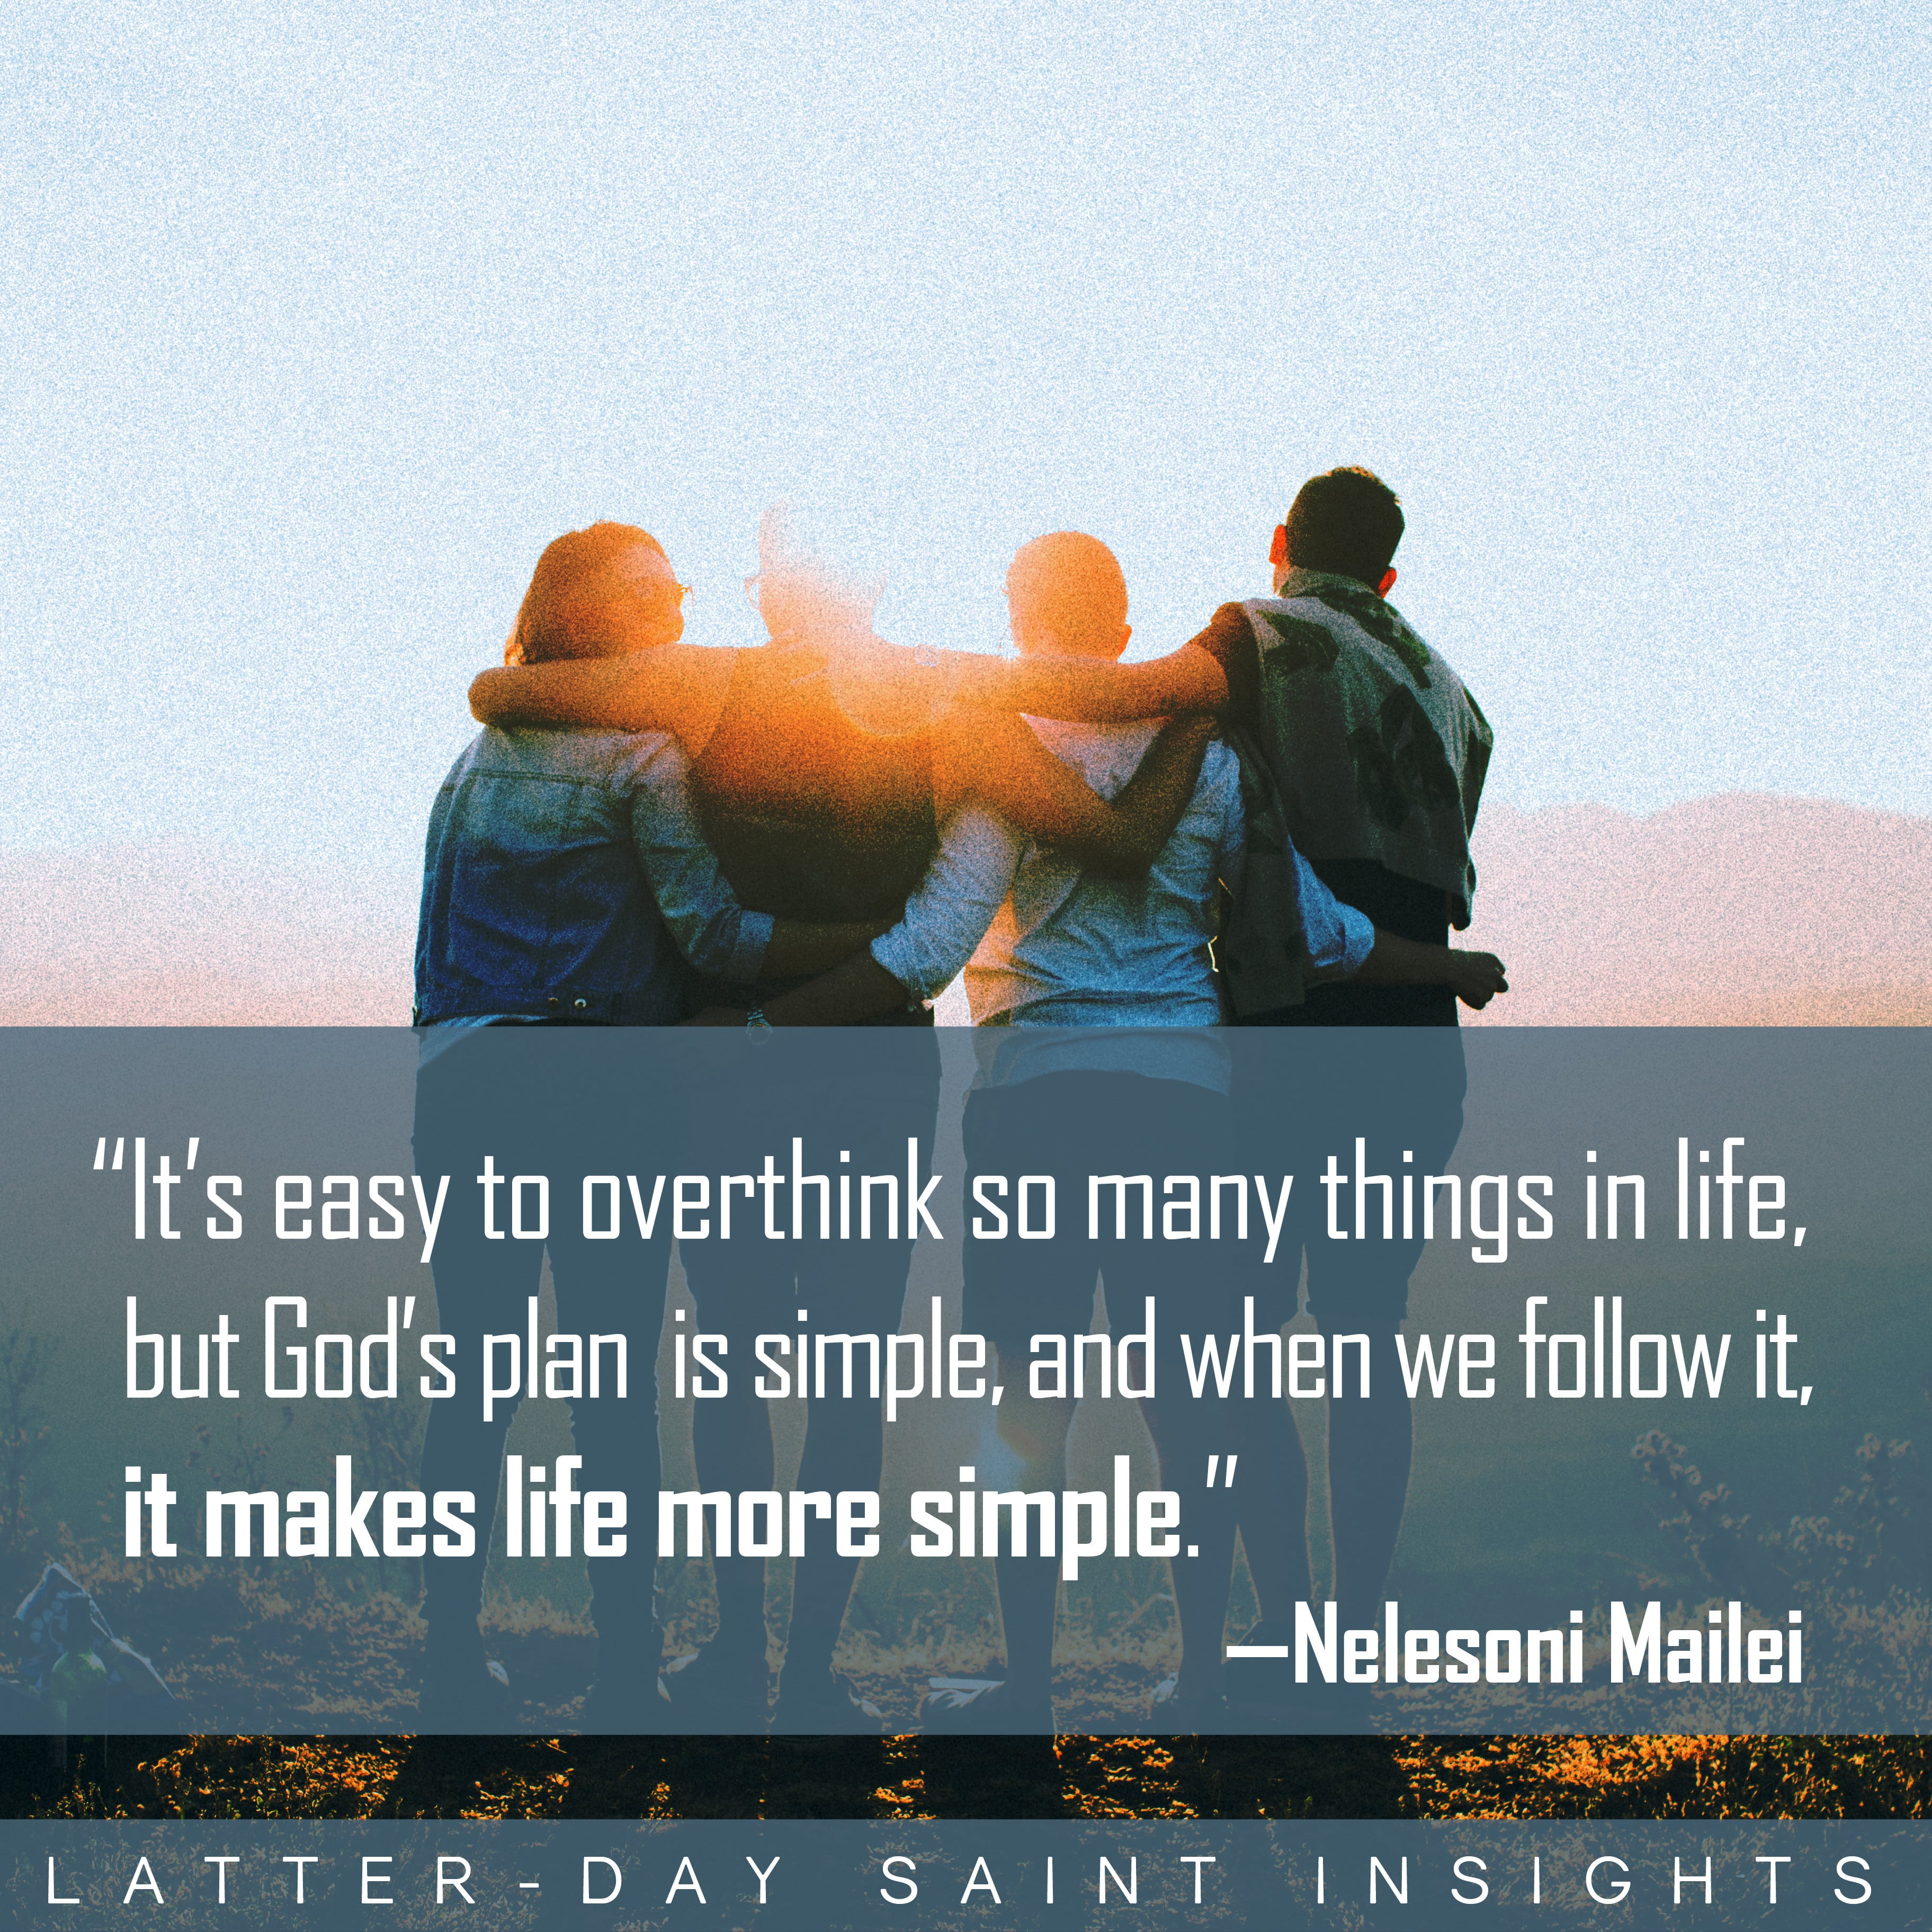 "It's easy to overthink so many things in life, but God's plan is simple, and when we follow it, it makes life more simple." -Neleson Mailei